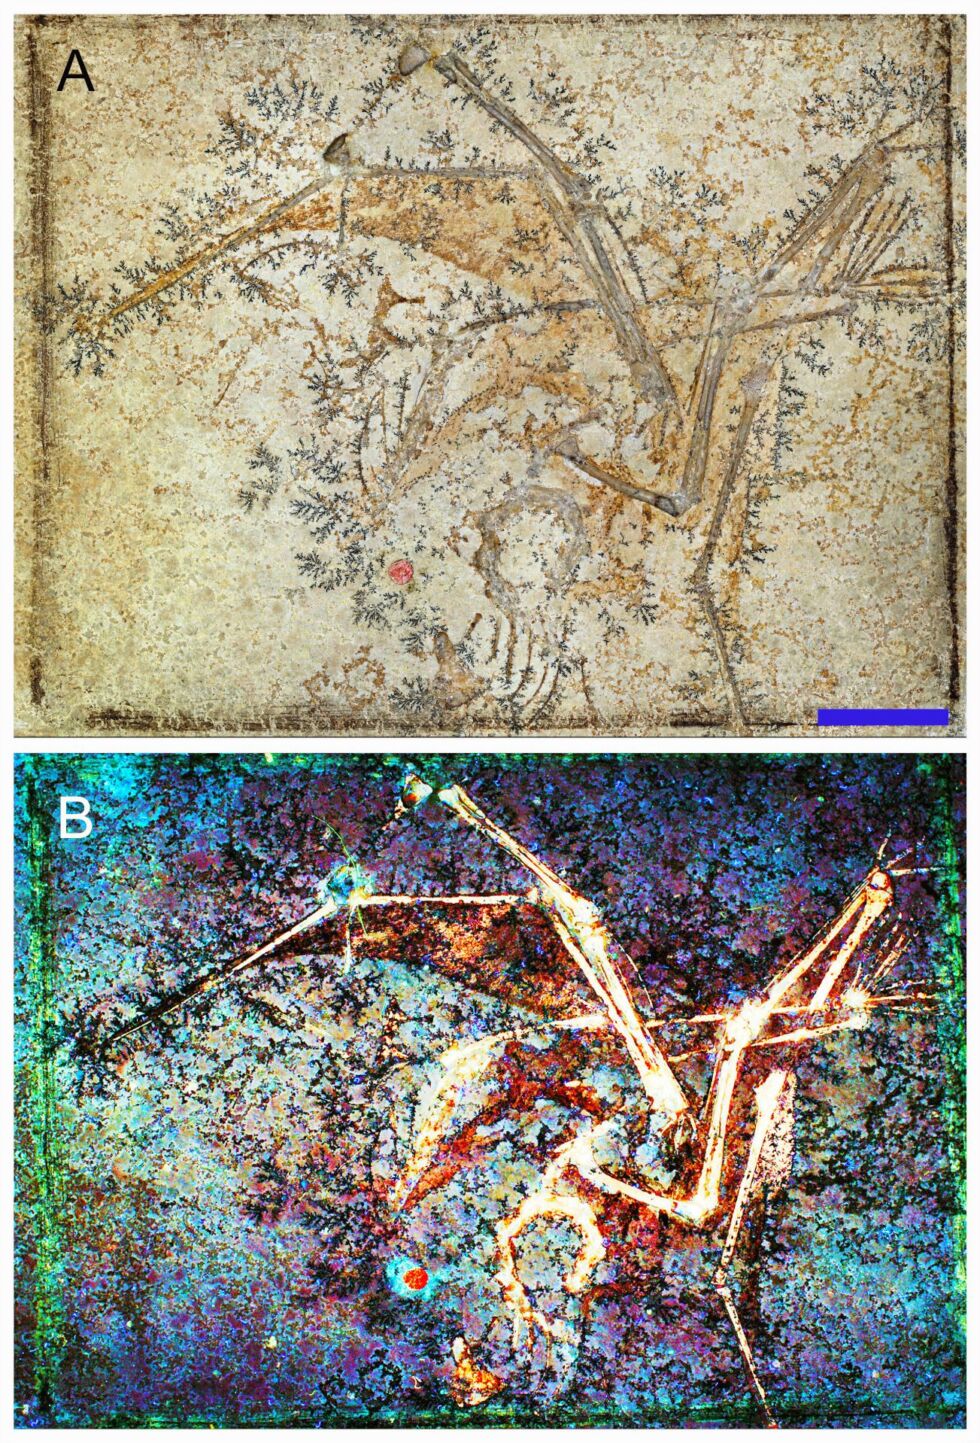 Skeleton and associated soft tissue of the aurorazhdarchid pterosaur fossil.